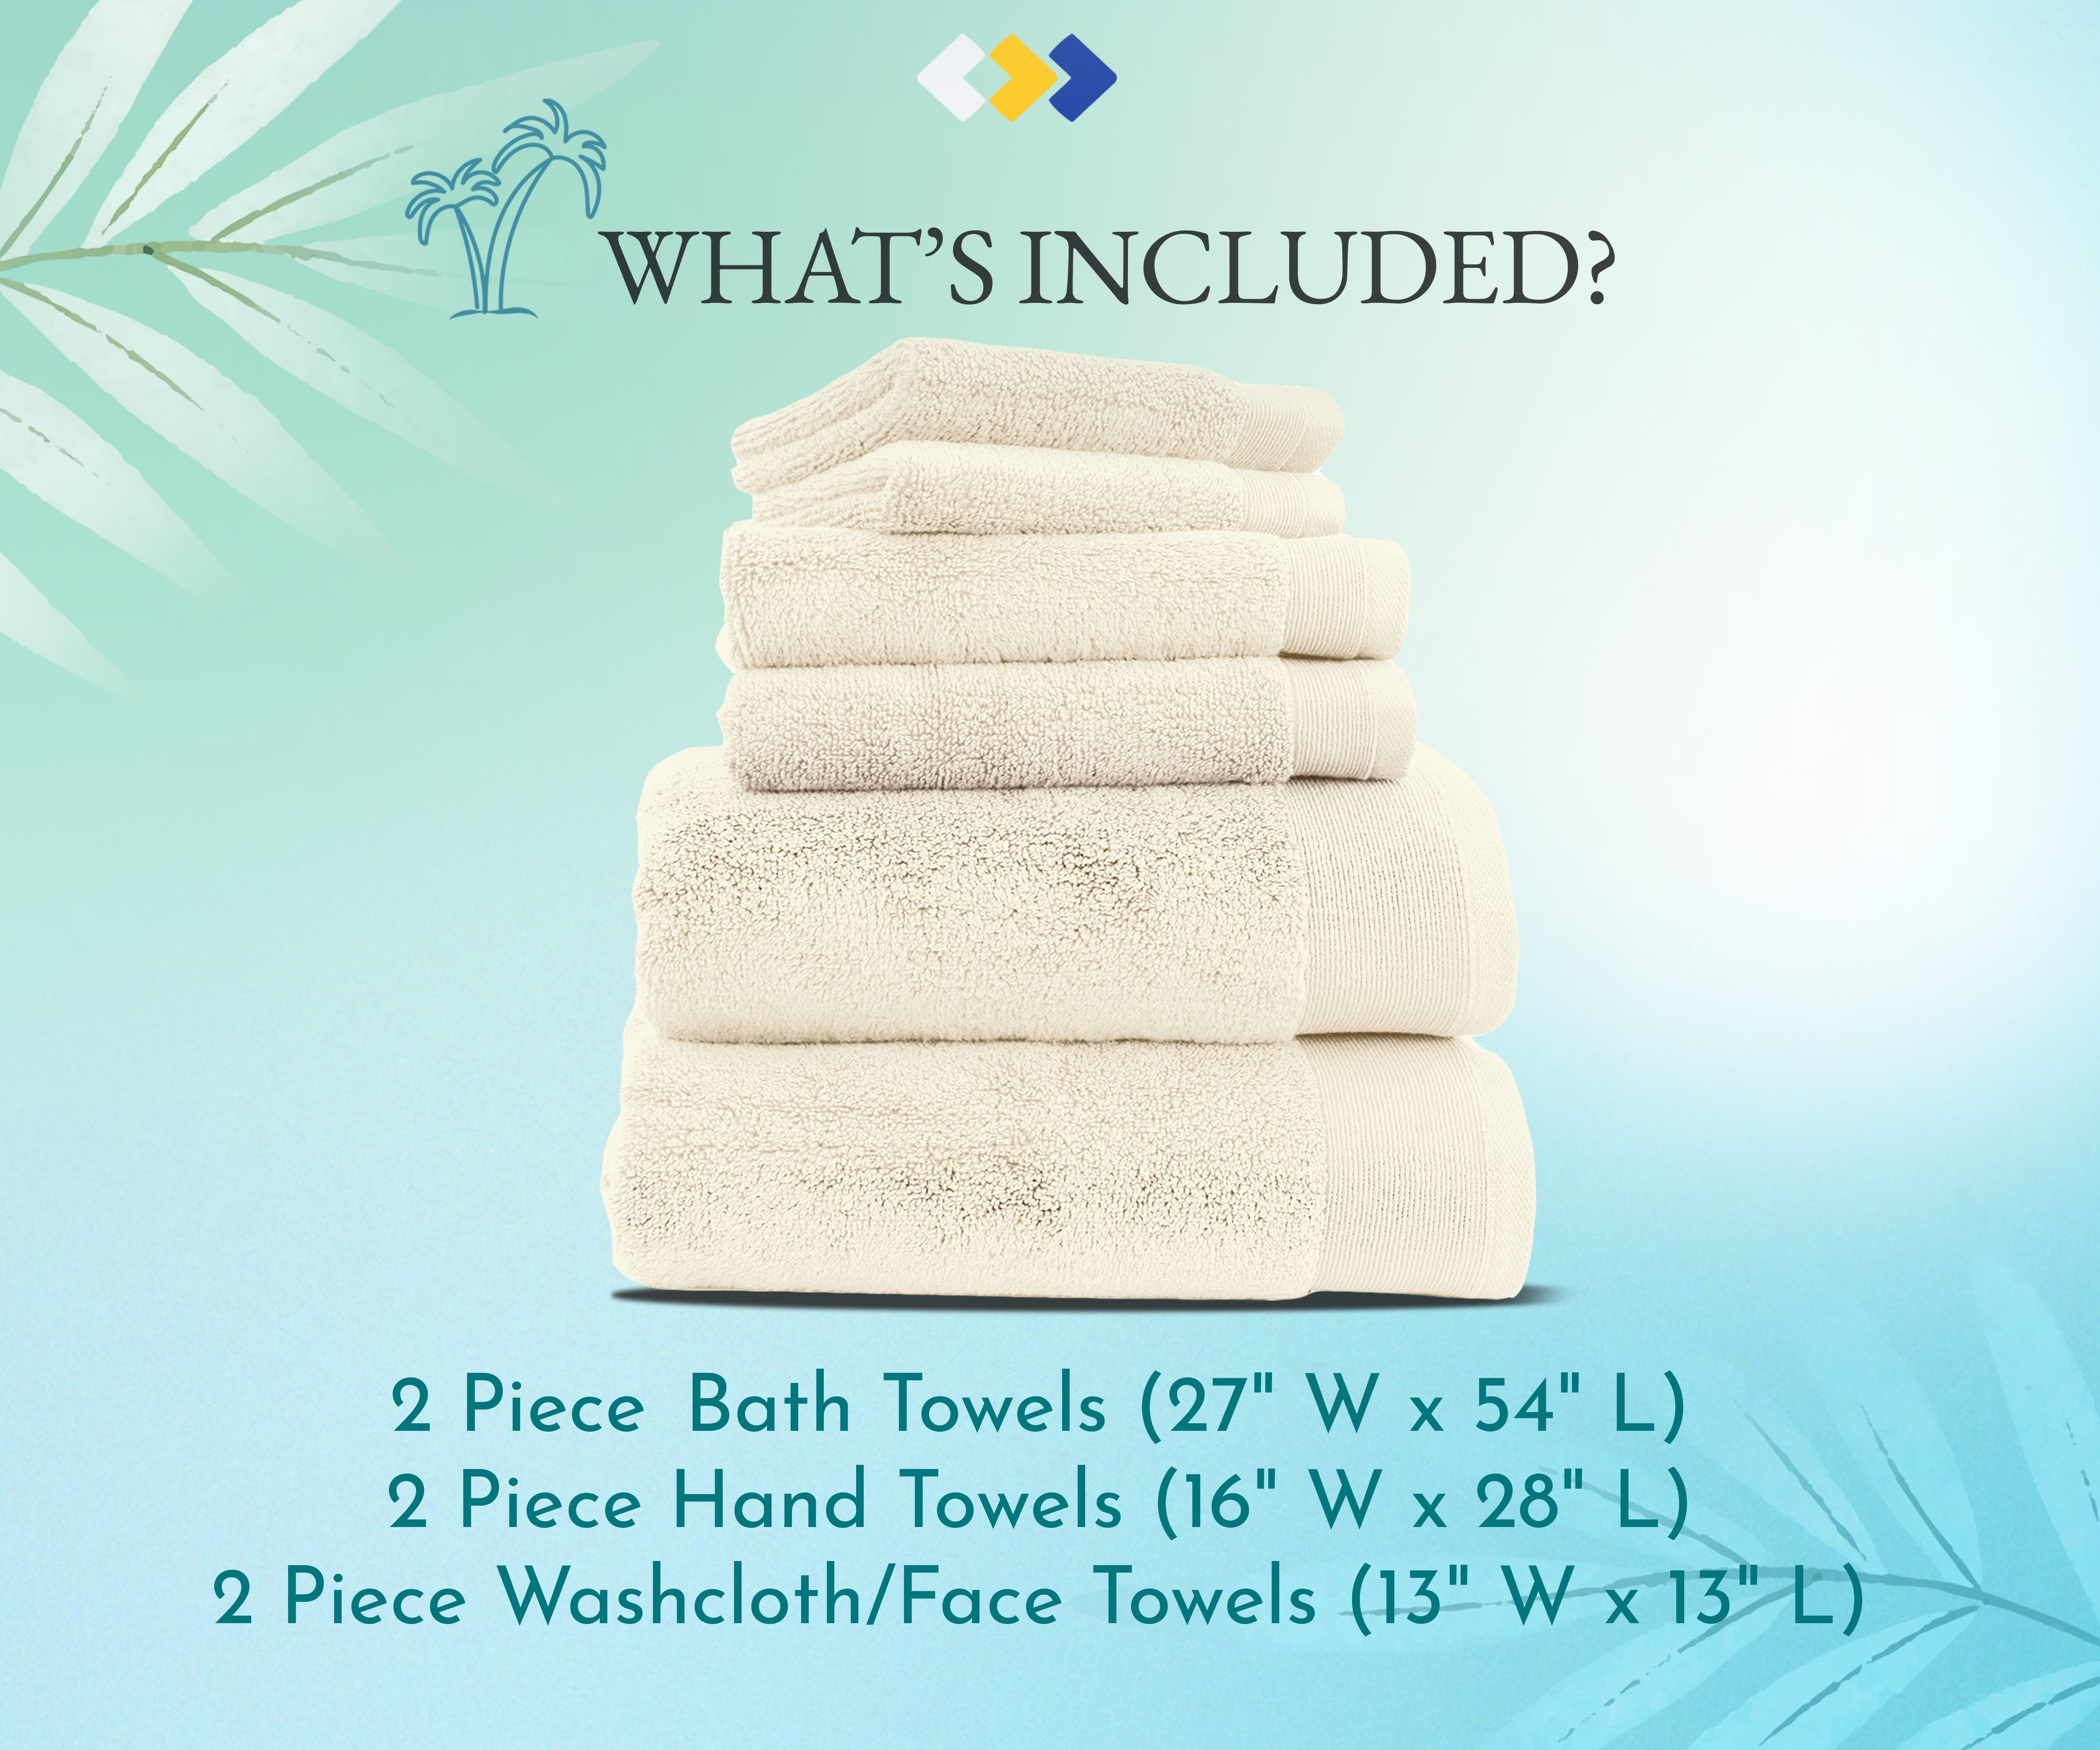 3-Pack Mystery Deal: Ultra-Soft Bathroom Towels - 54 x 27 100% Cotton  Large Bath Towels